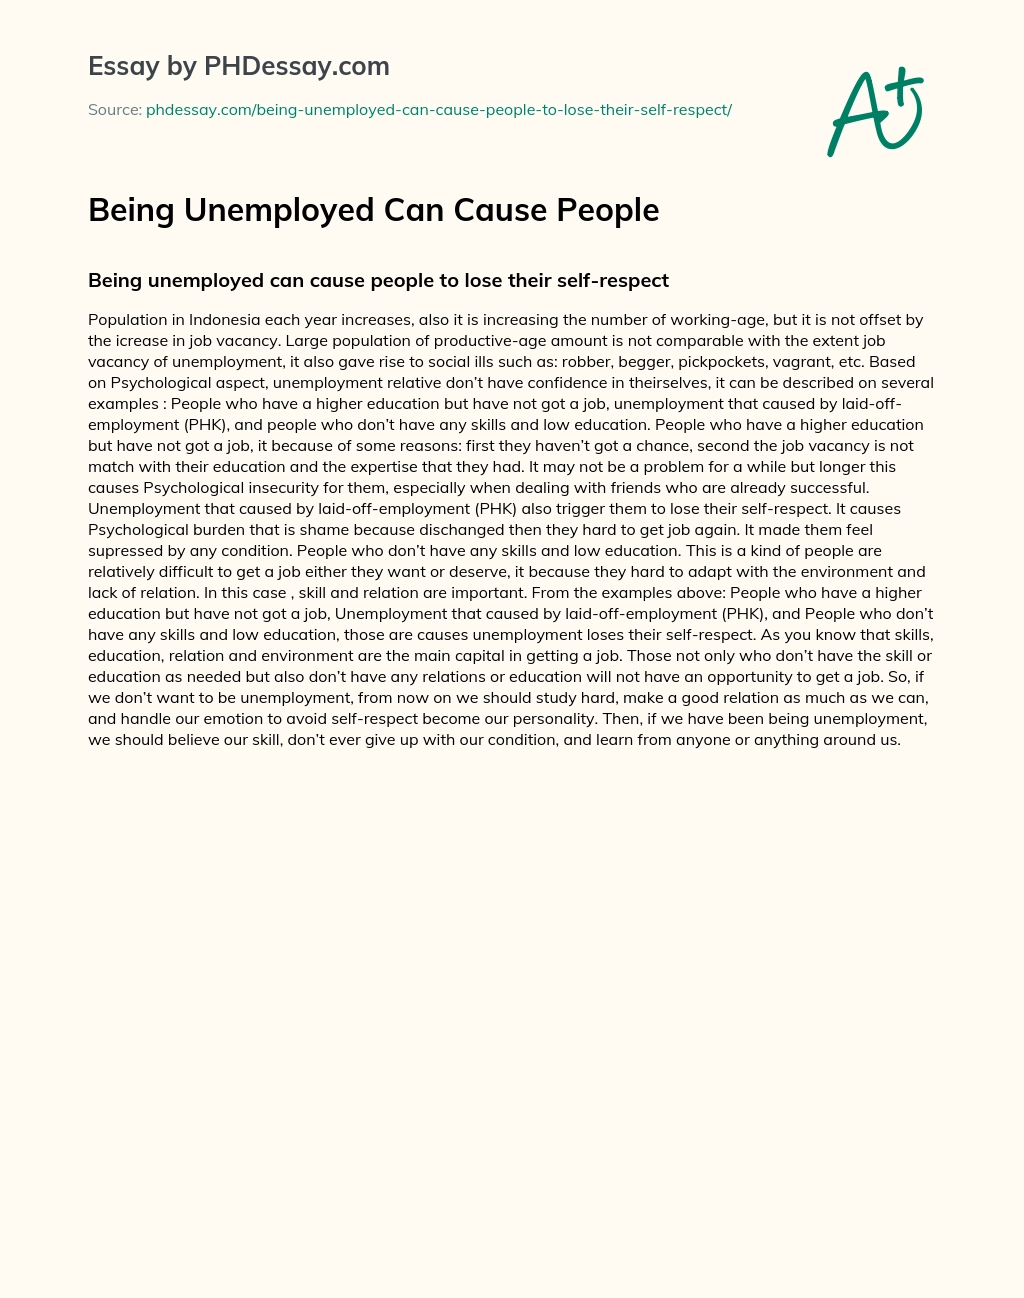 Being Unemployed Can Cause People essay